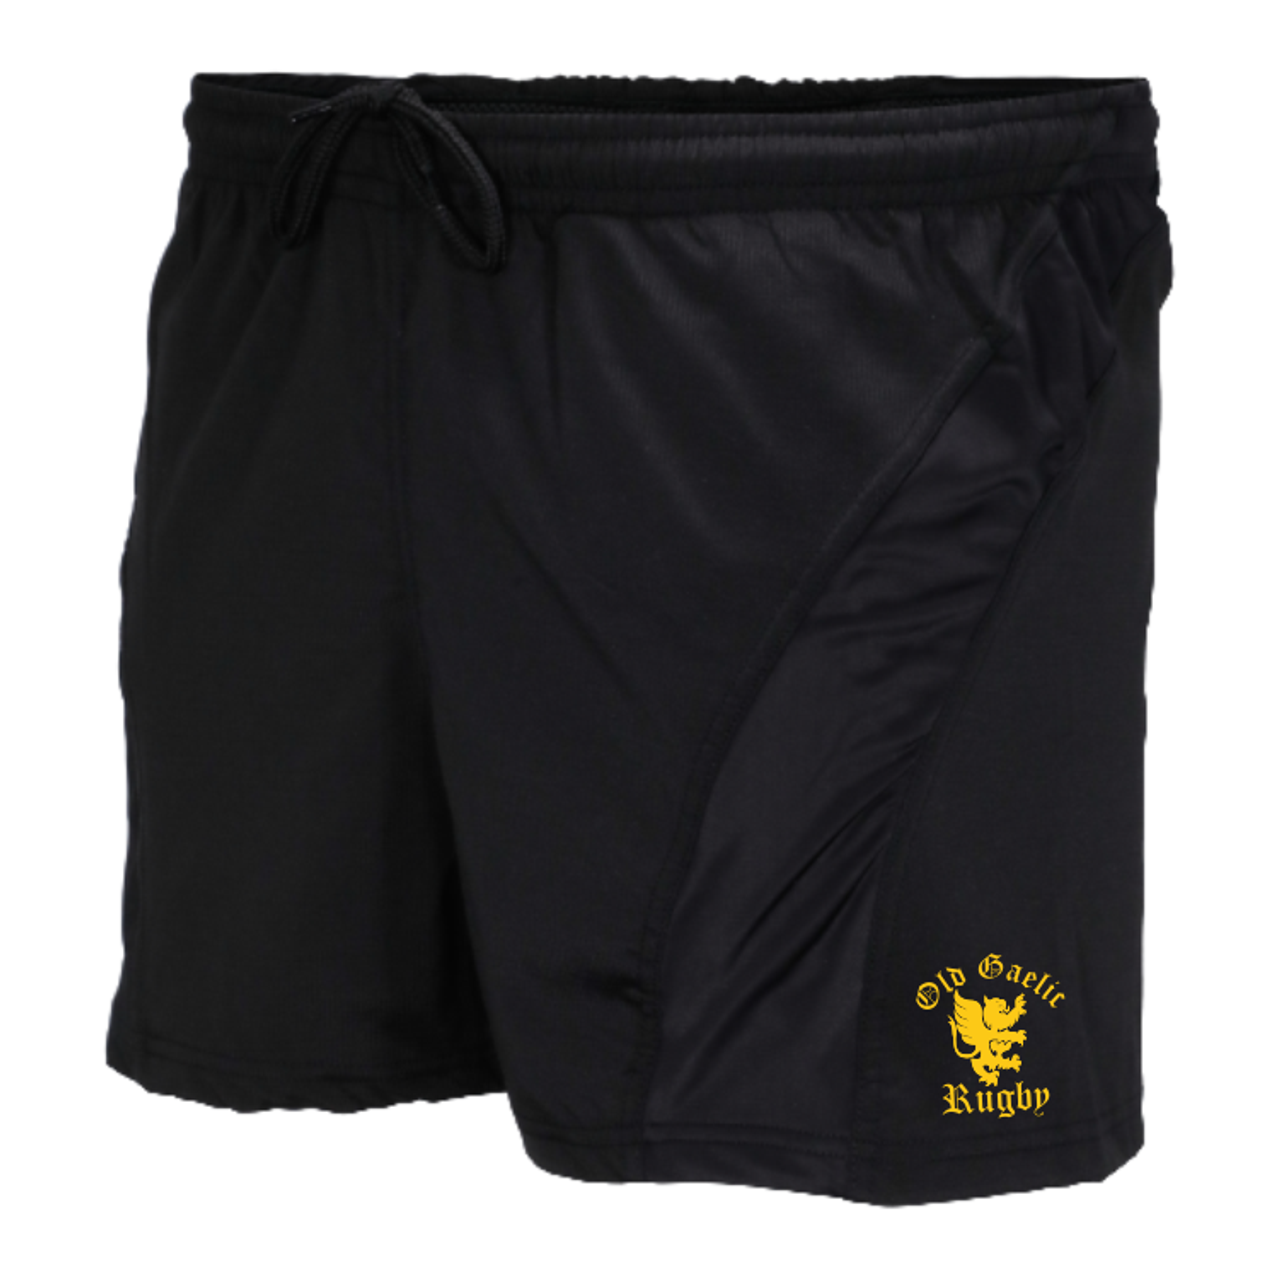 Old Gaelic SRS Performance Rugby Shorts, Black